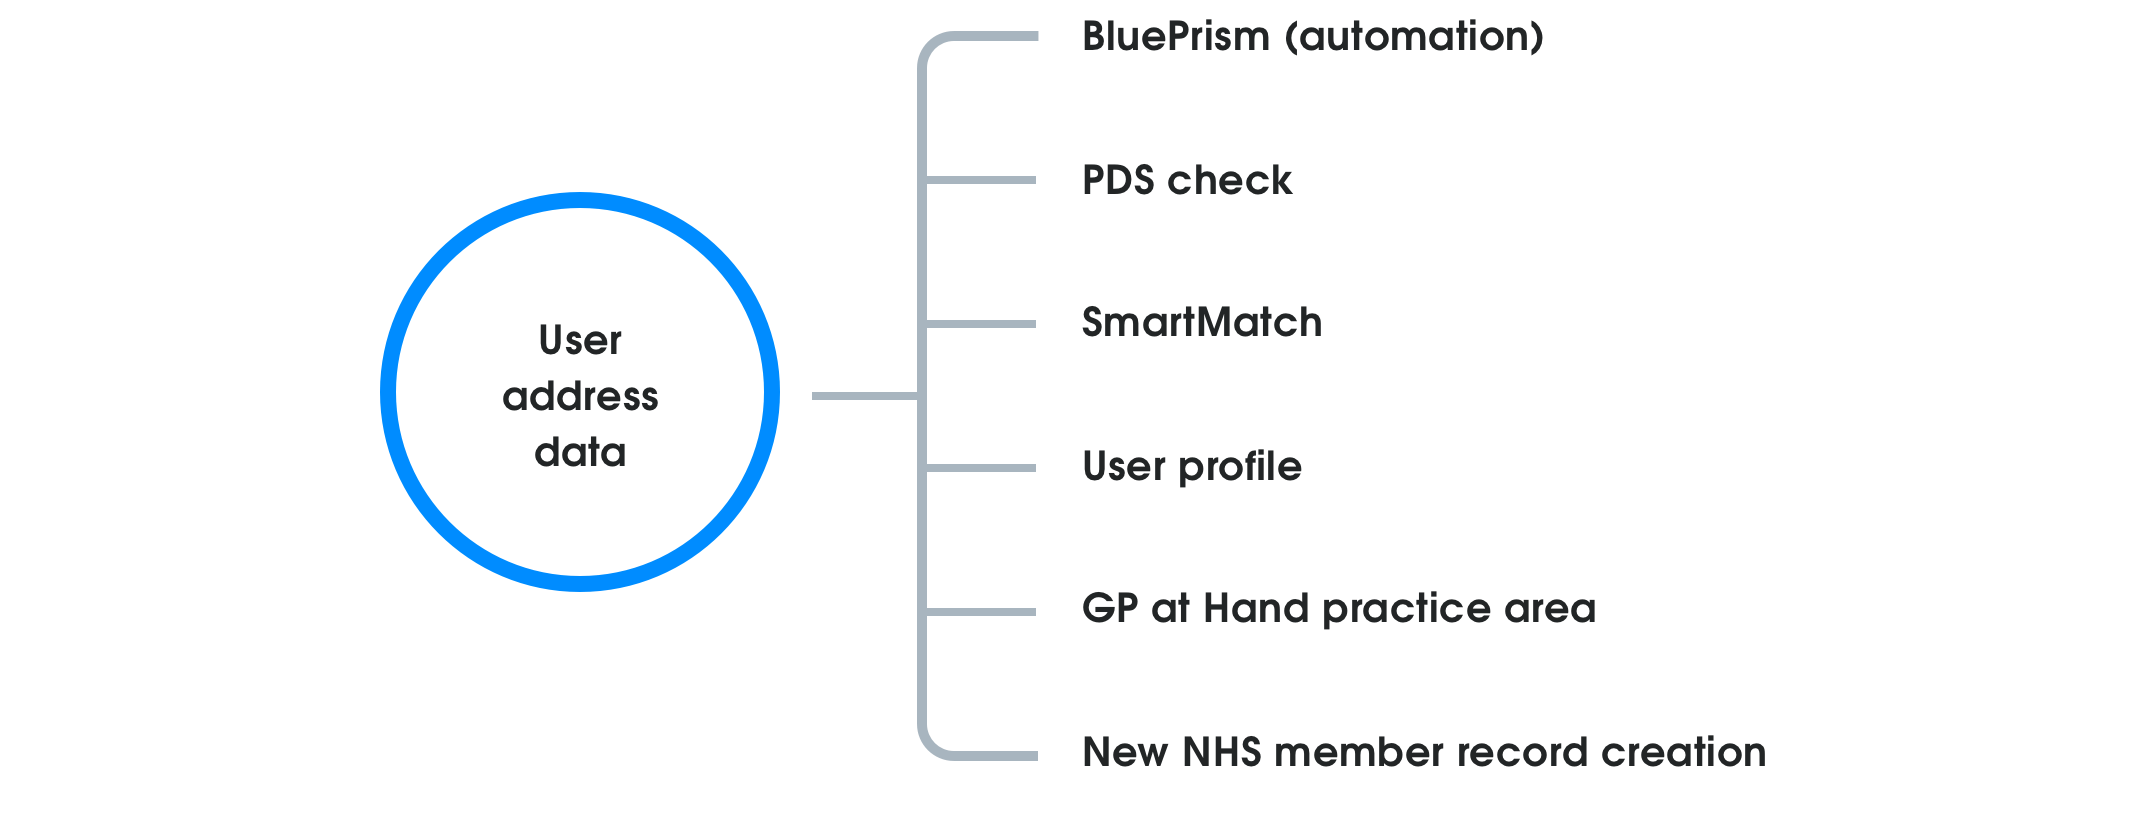 The address collected here was used for automation, PDS checking, smart matching, user's profile, checking the GP area, and to create a new NHS record if needed.